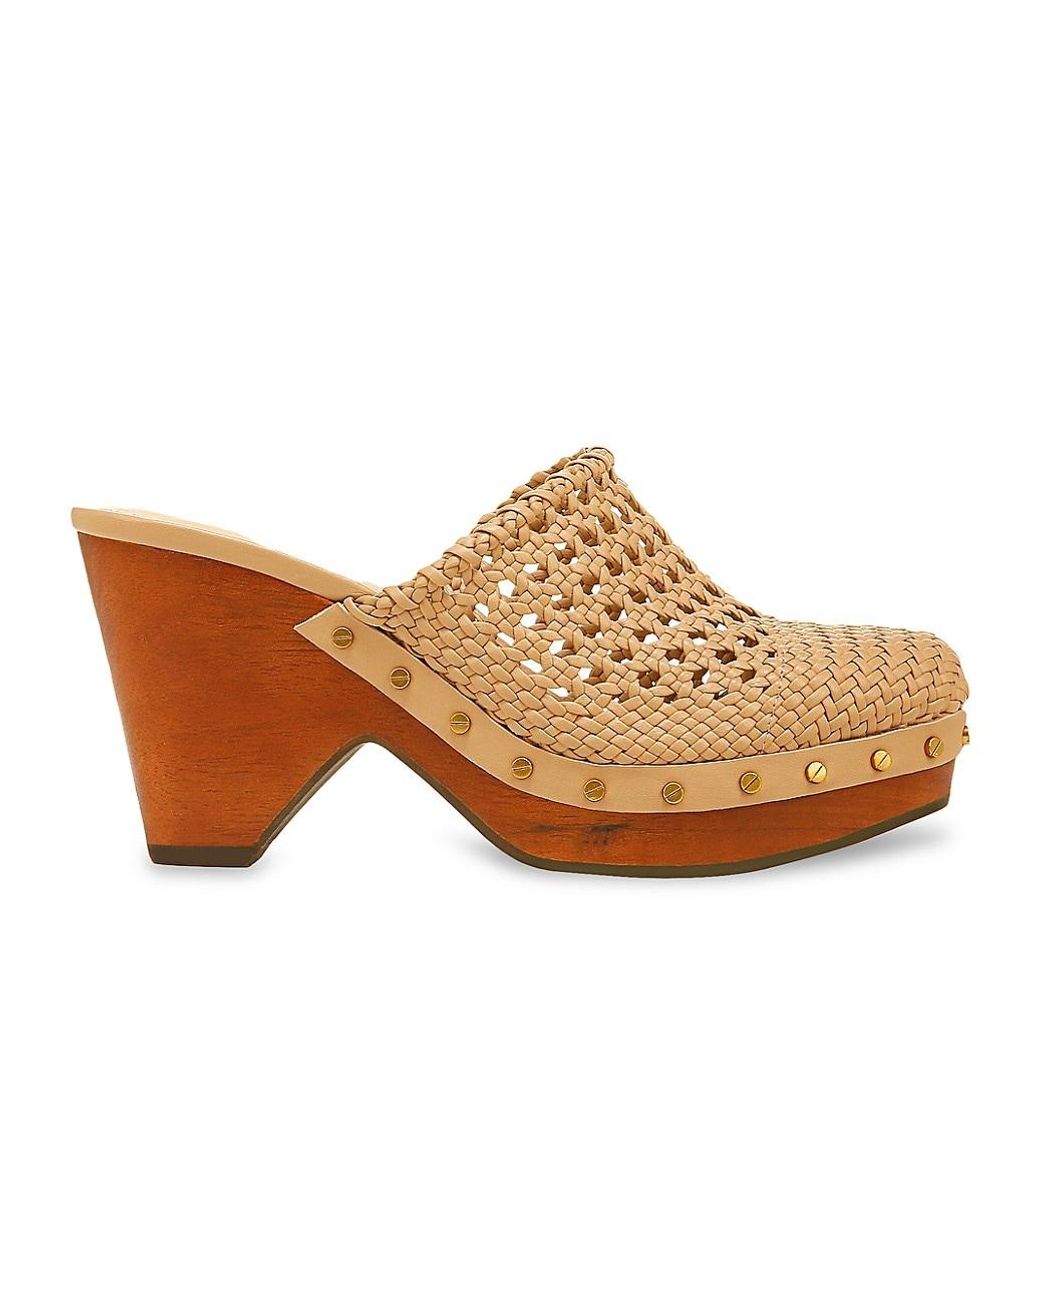 Veronica Beard Hardie Woven Leather Clogs in Sand (Brown) | Lyst